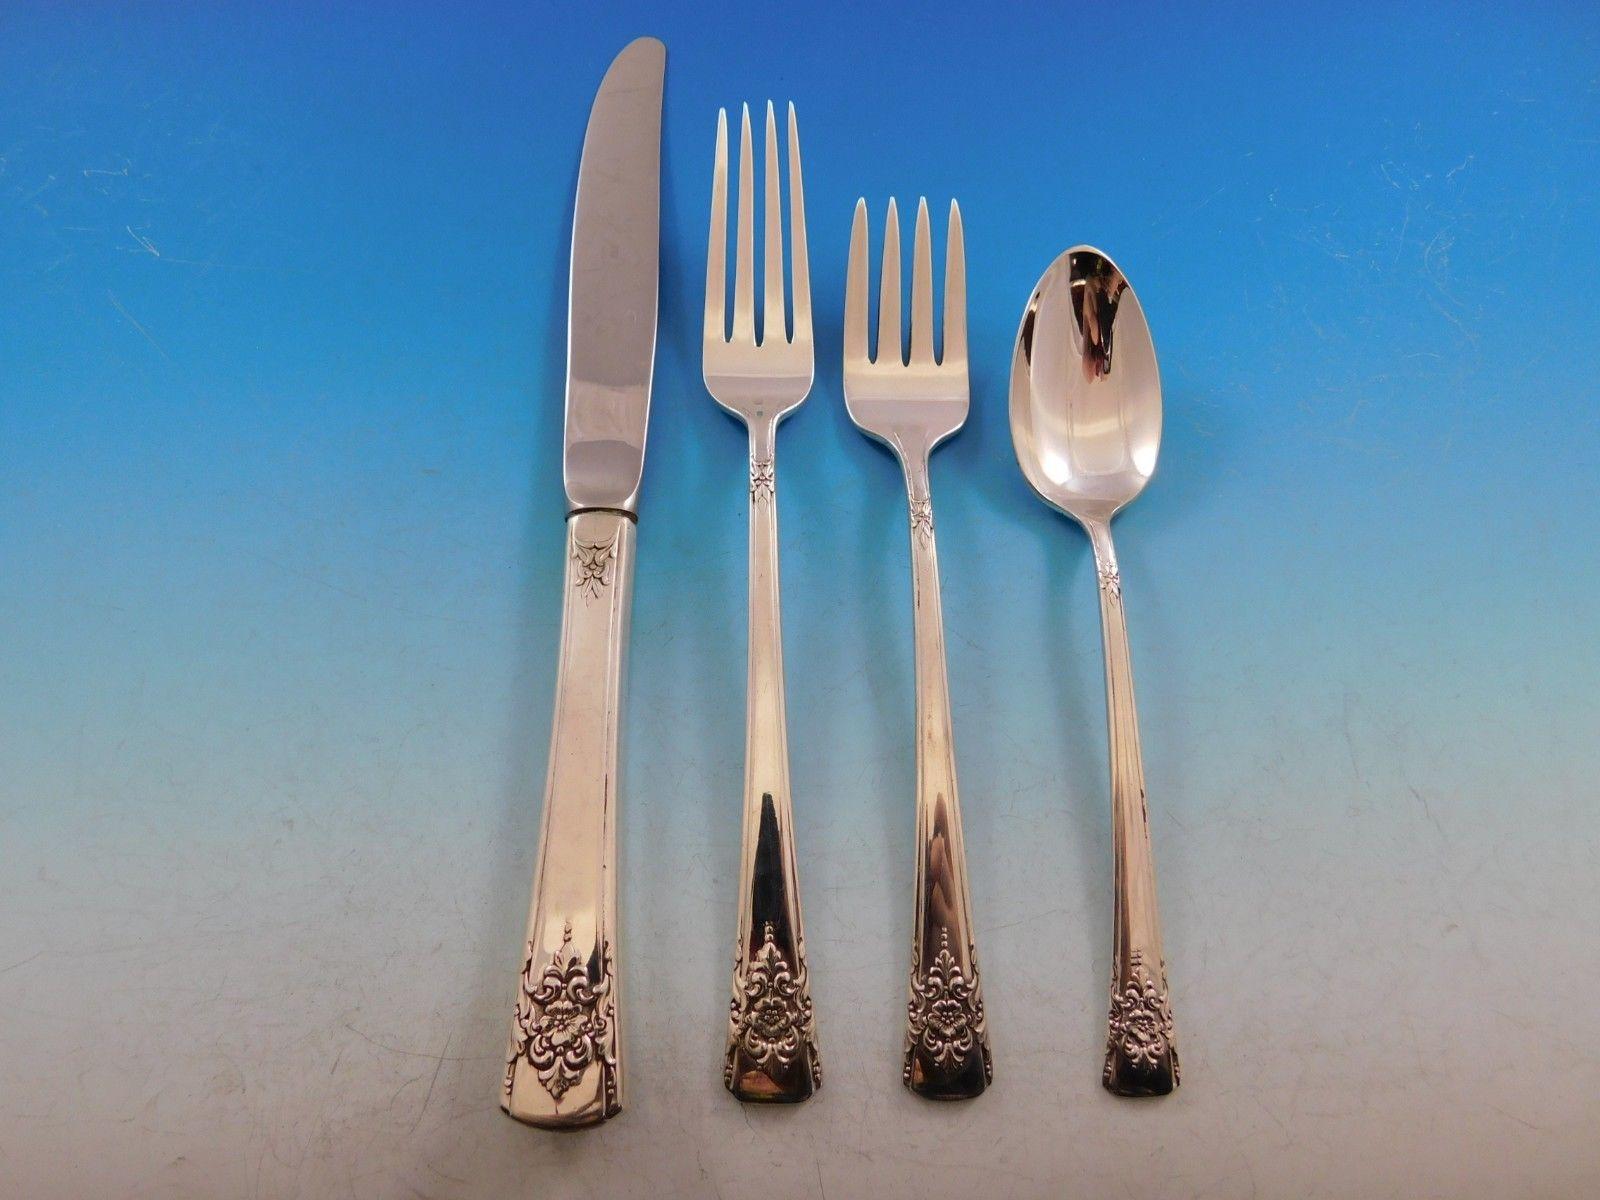 Beautiful Dorchester by International sterling silver flatware set of 48 pieces. This set includes:

8 knives, 8 3/4